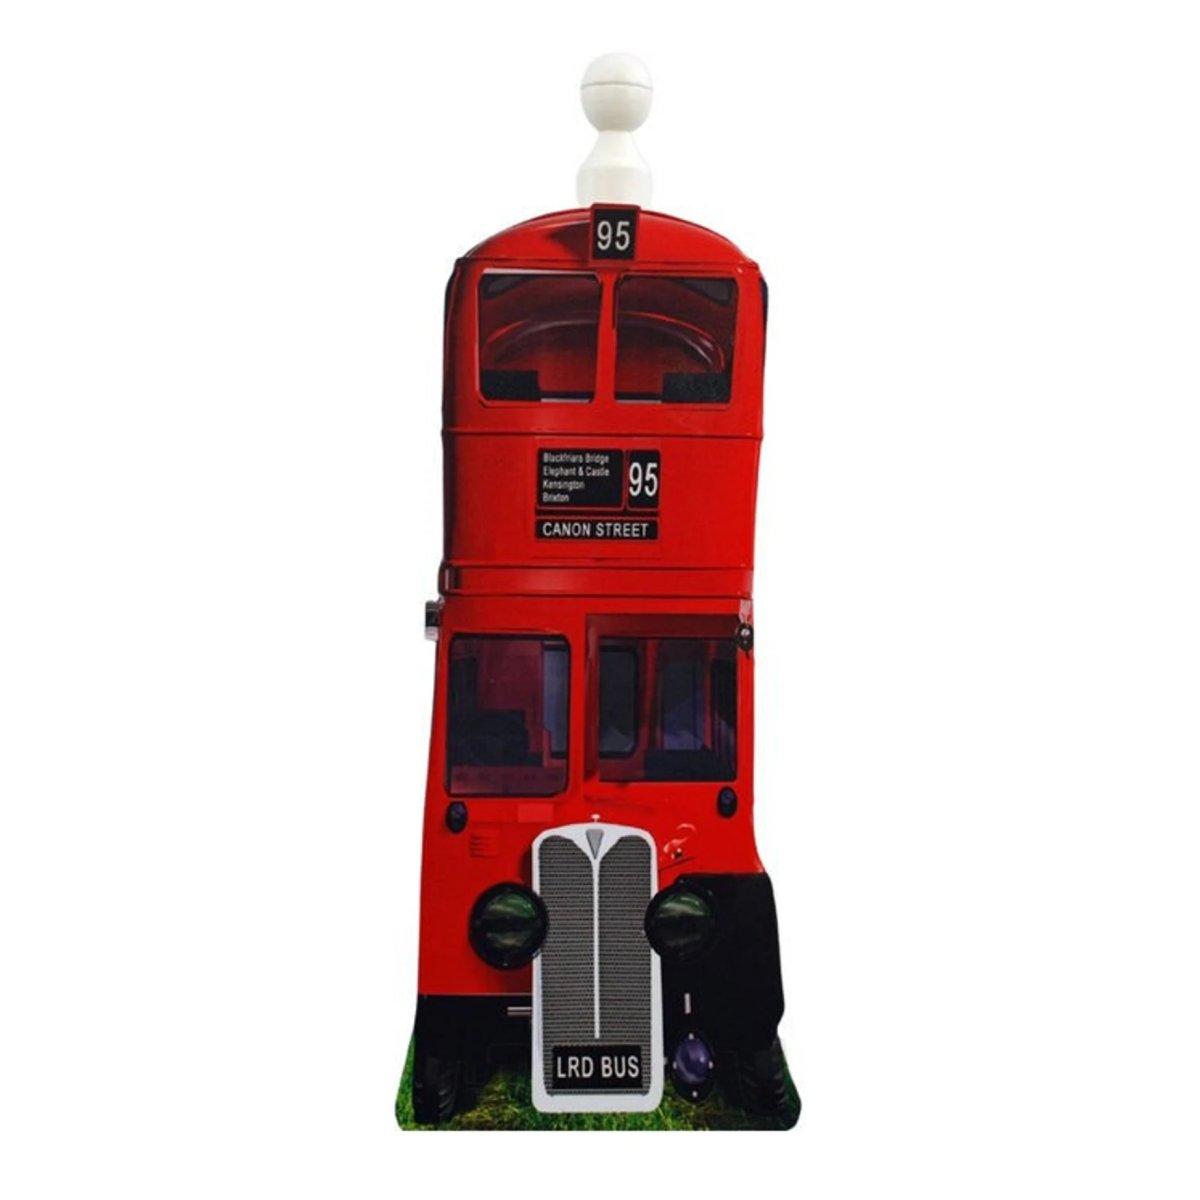 Red London Bus Roll Holder